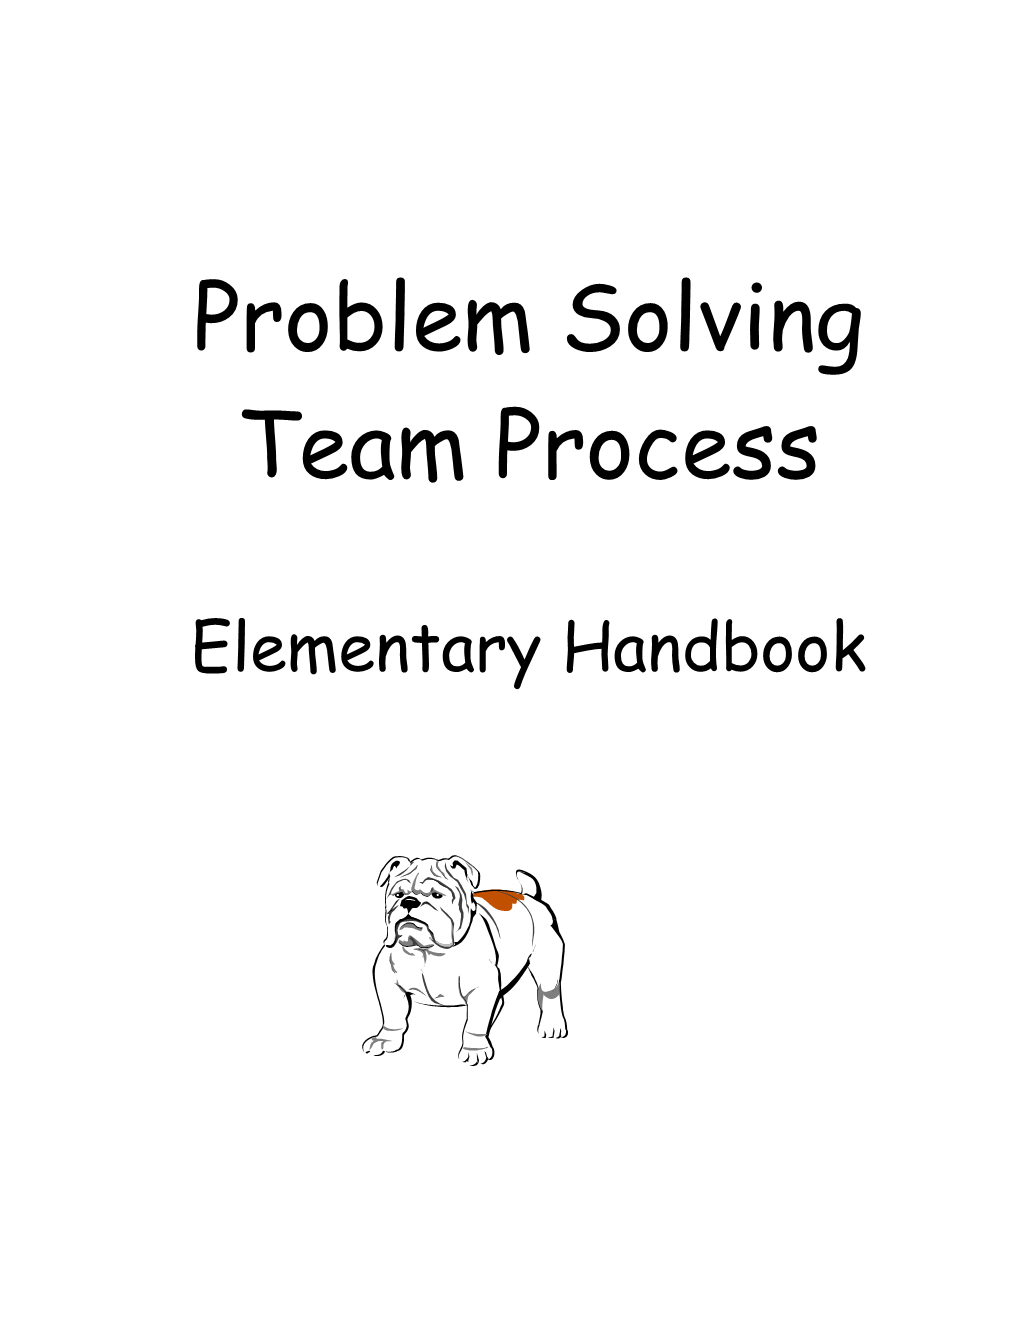 Problem Solving Is a Way of Examining All Issues with All Students, Whether the Concerns